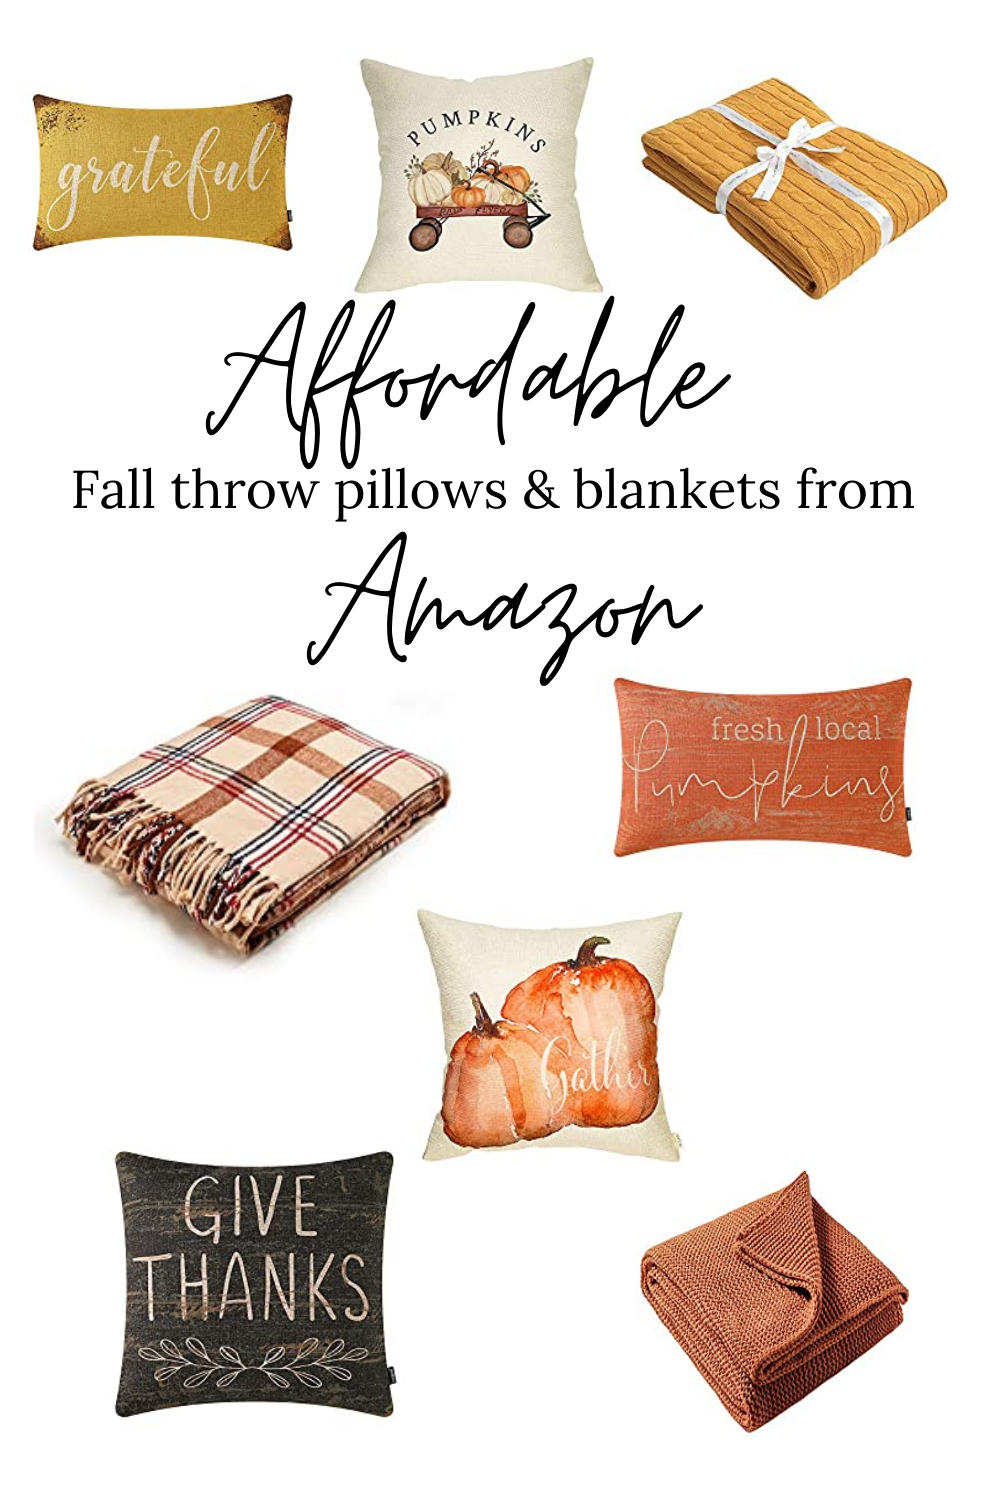 https://mylifeonkayderosscreek.com/wp-content/uploads/2020/10/Affordable-fall-pillows-and-throws.png